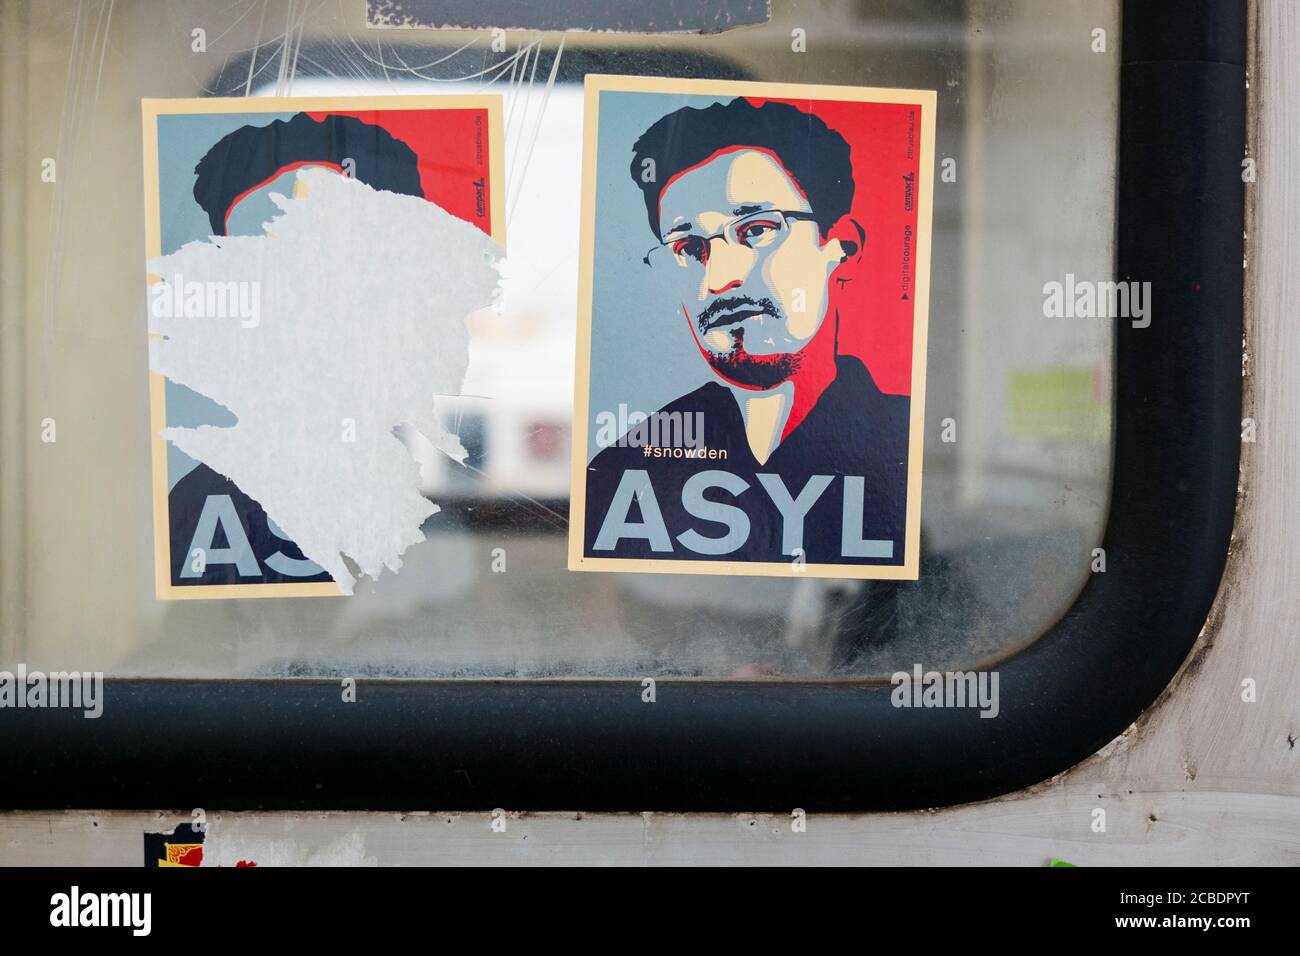 A couple of Edward Snowden ASYL stickers in the style of Shepard Fairy's Obama HOPE poster. In Vienna, Austria. Stock Photo